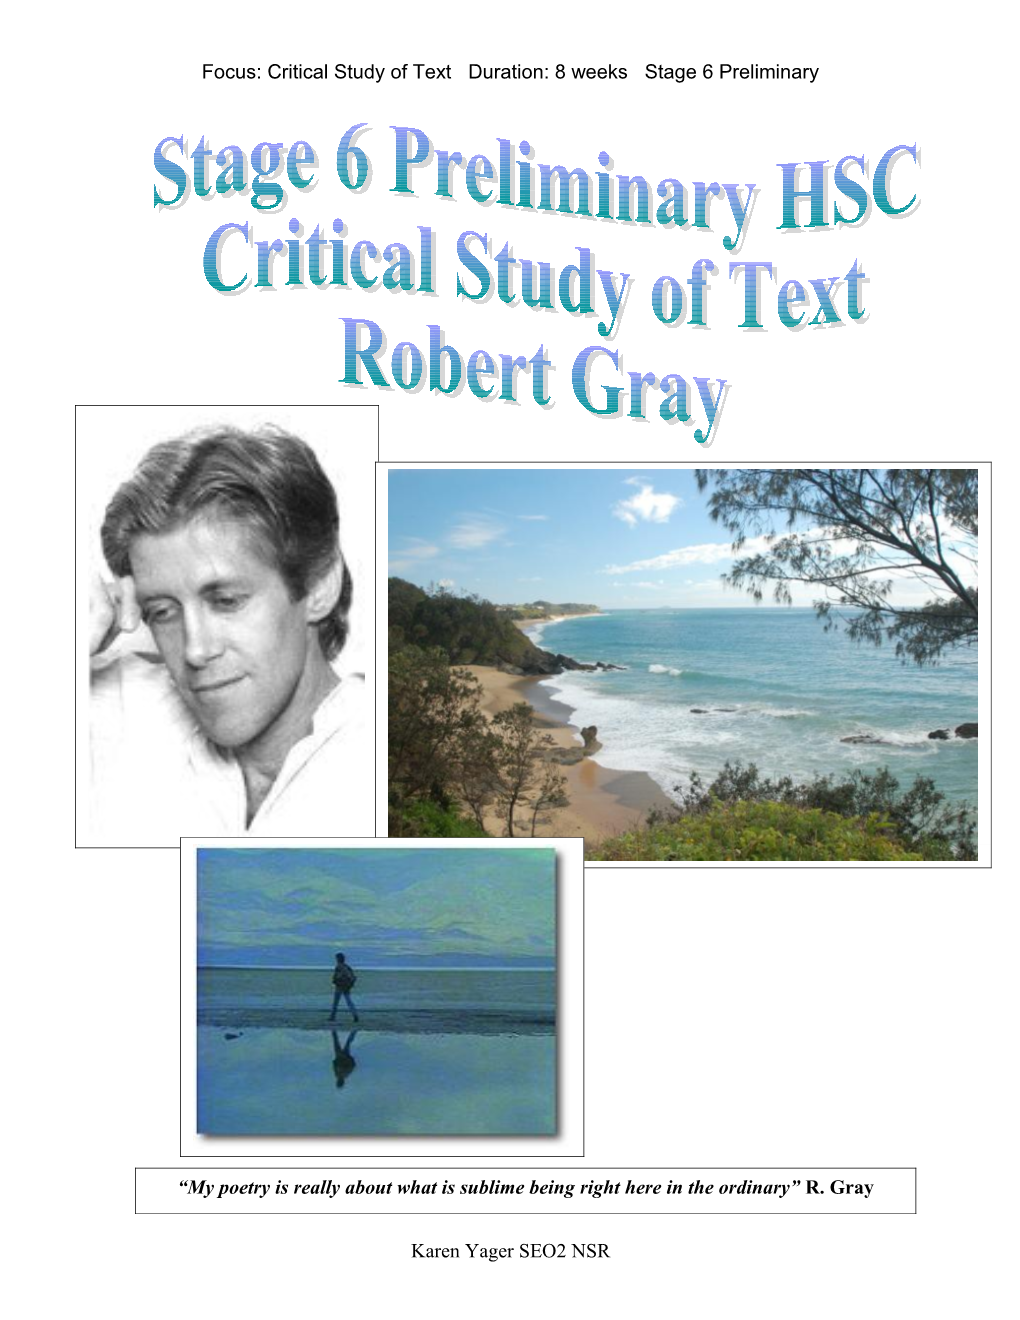 Focus: Critical Study of Text Duration: 8 Weeks Stage 6 Preliminary